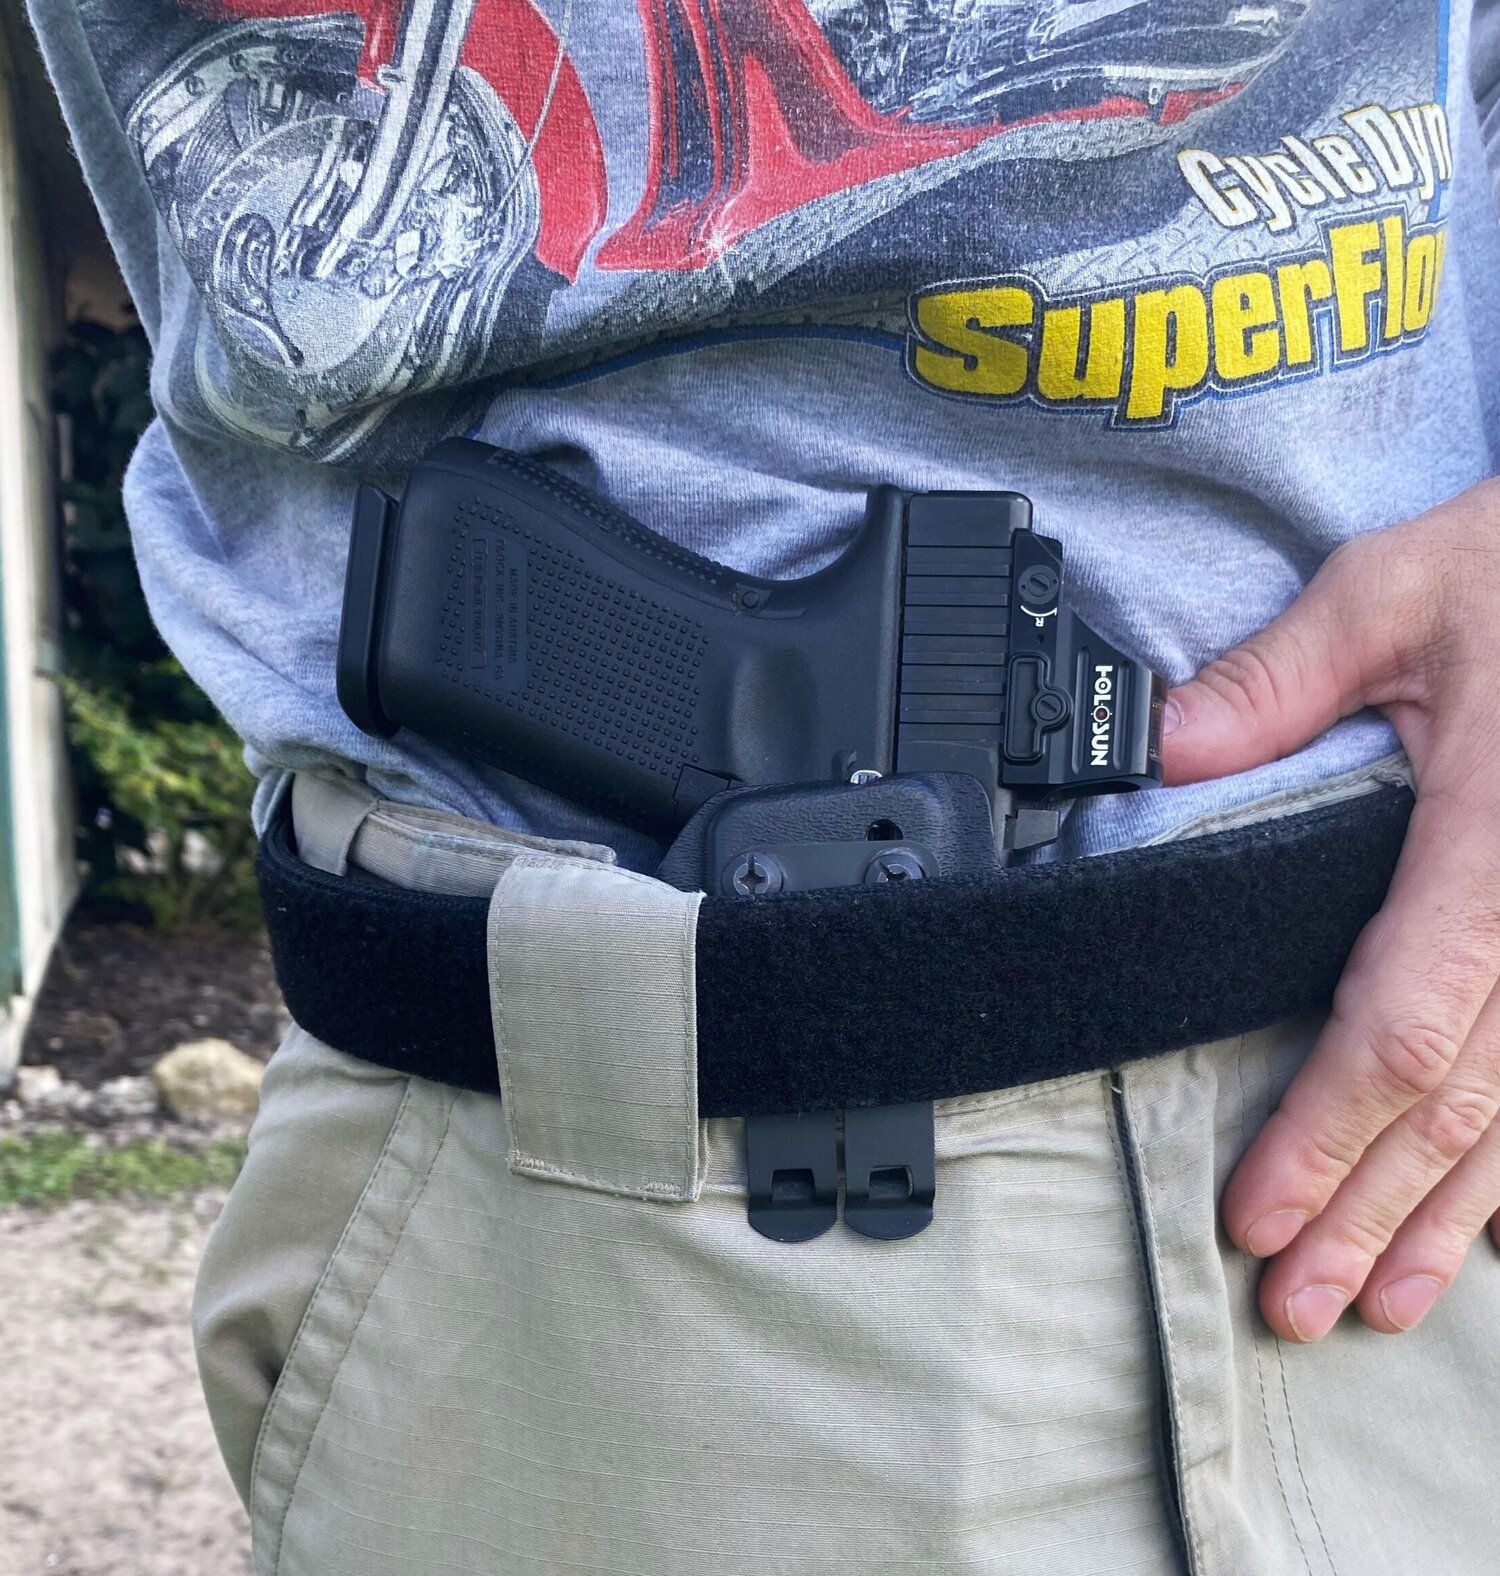 Discreet Carry Concepts belt clips — Firearms Insider